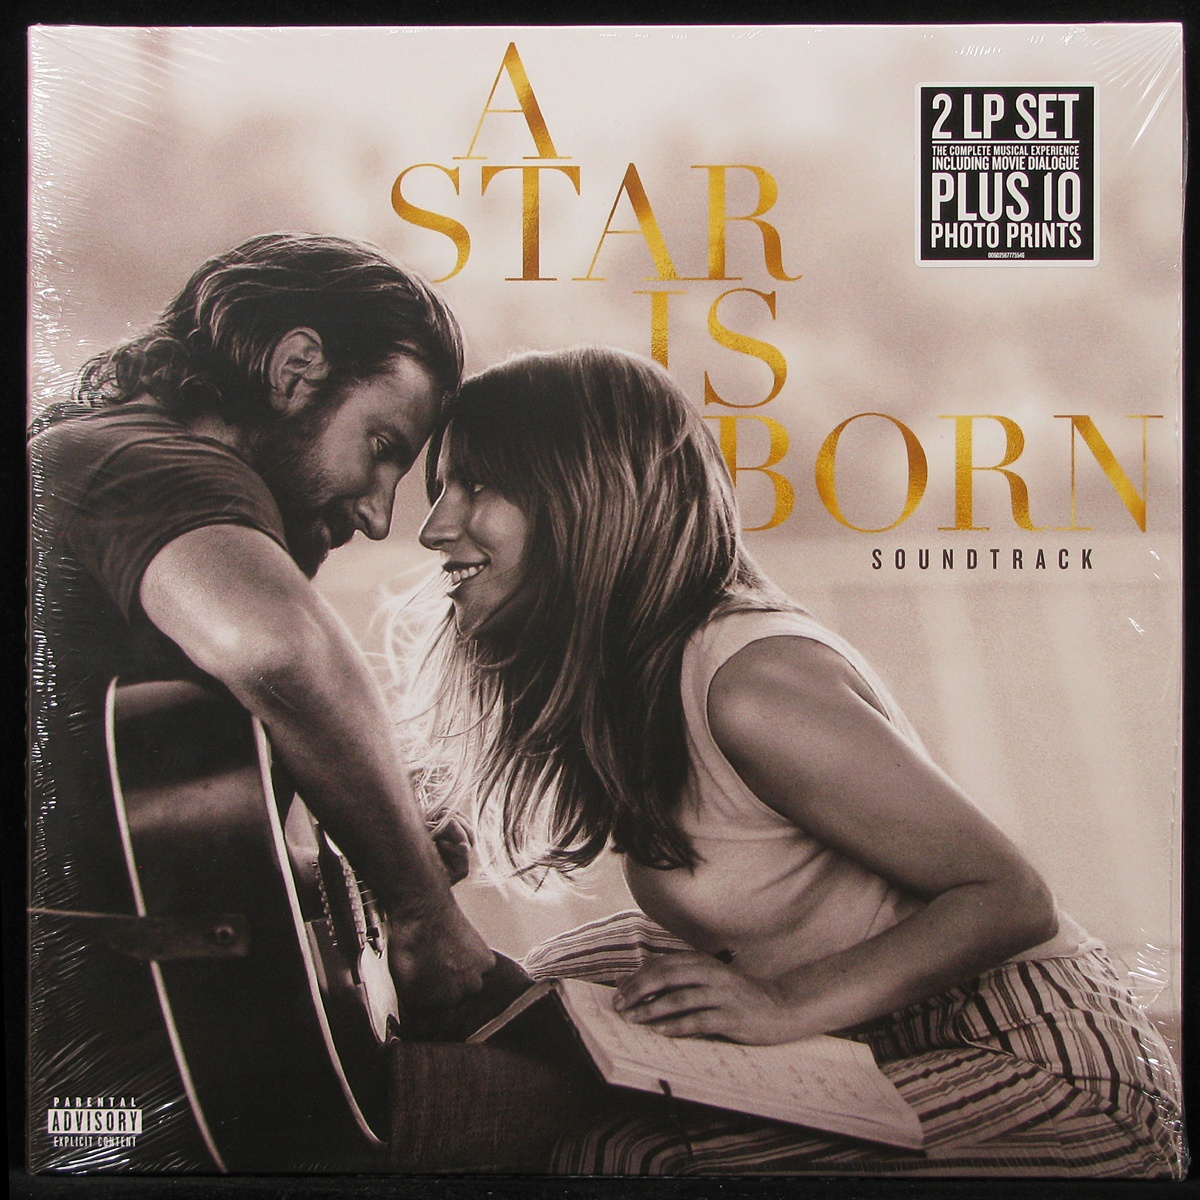 A Star Is Born Soundtrack 